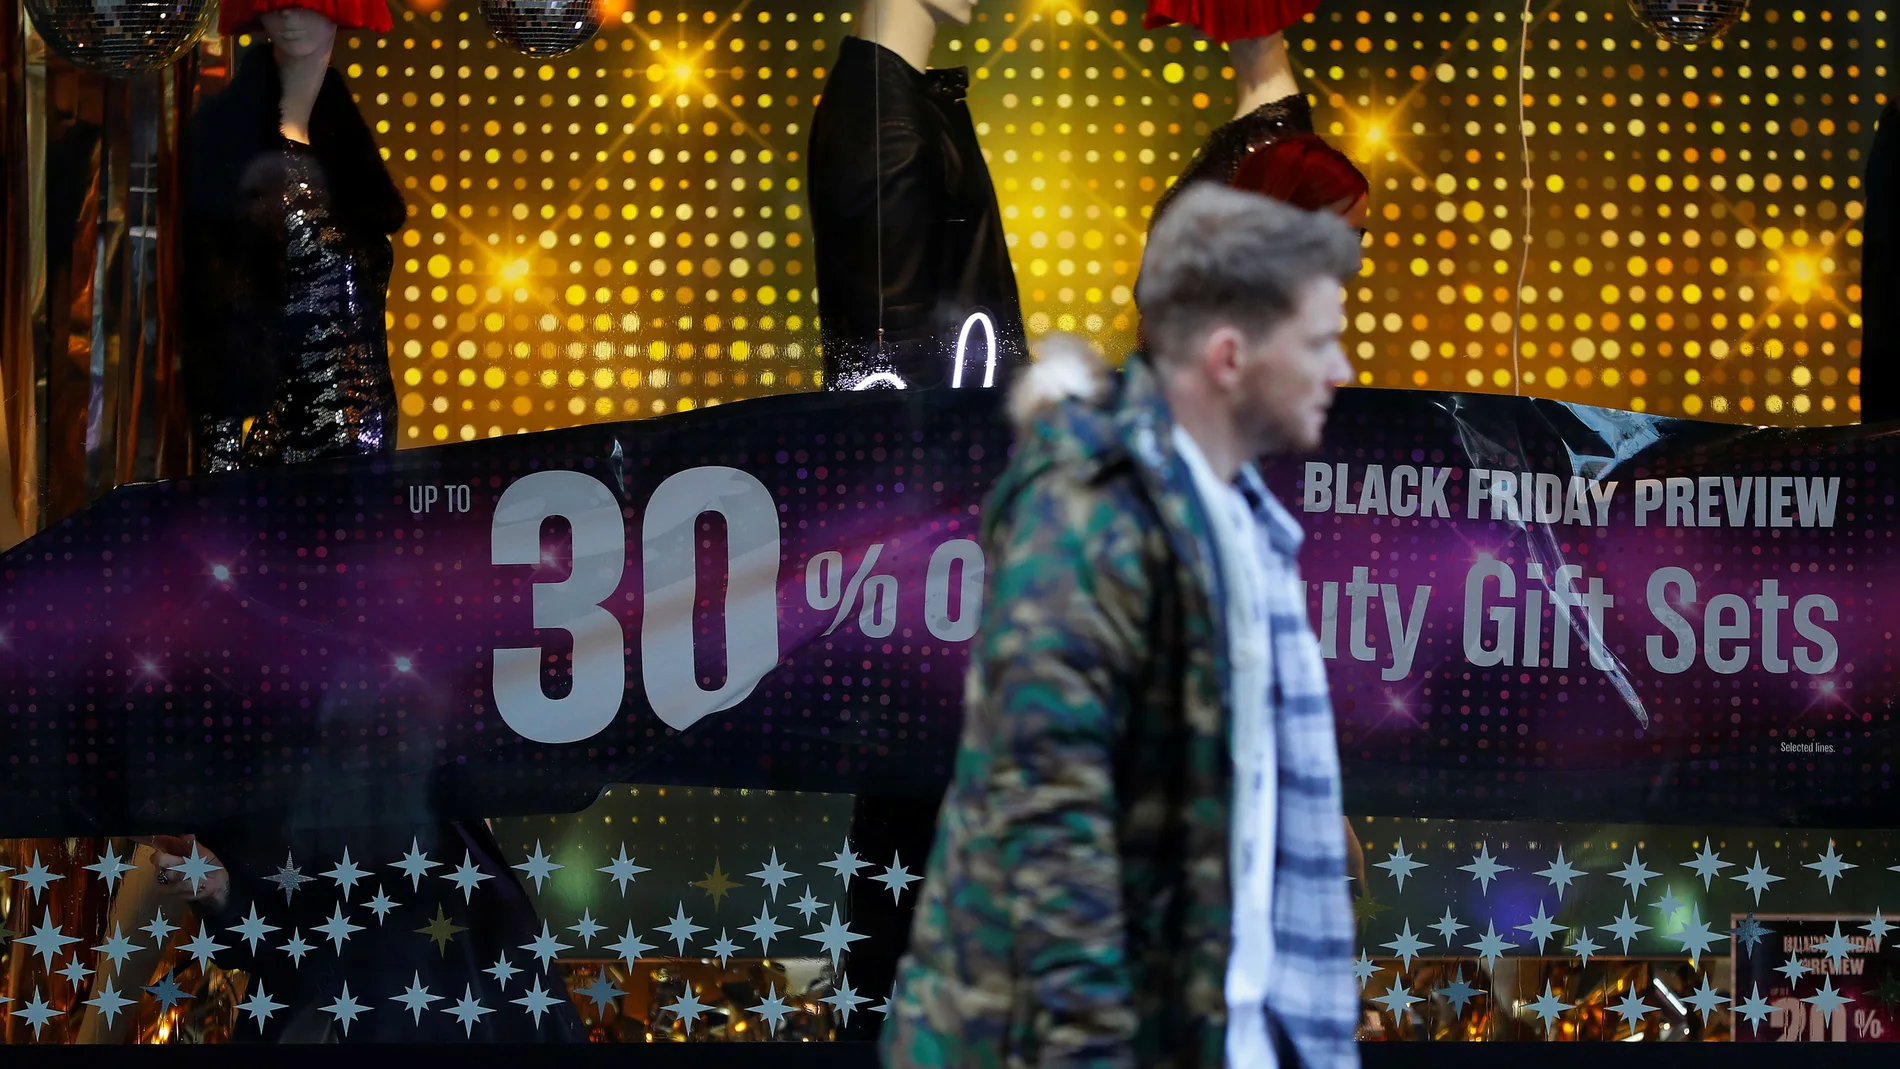 A man walks past a sign advertising Black Friday offers at a House of Fraser store in Manchester, Britain